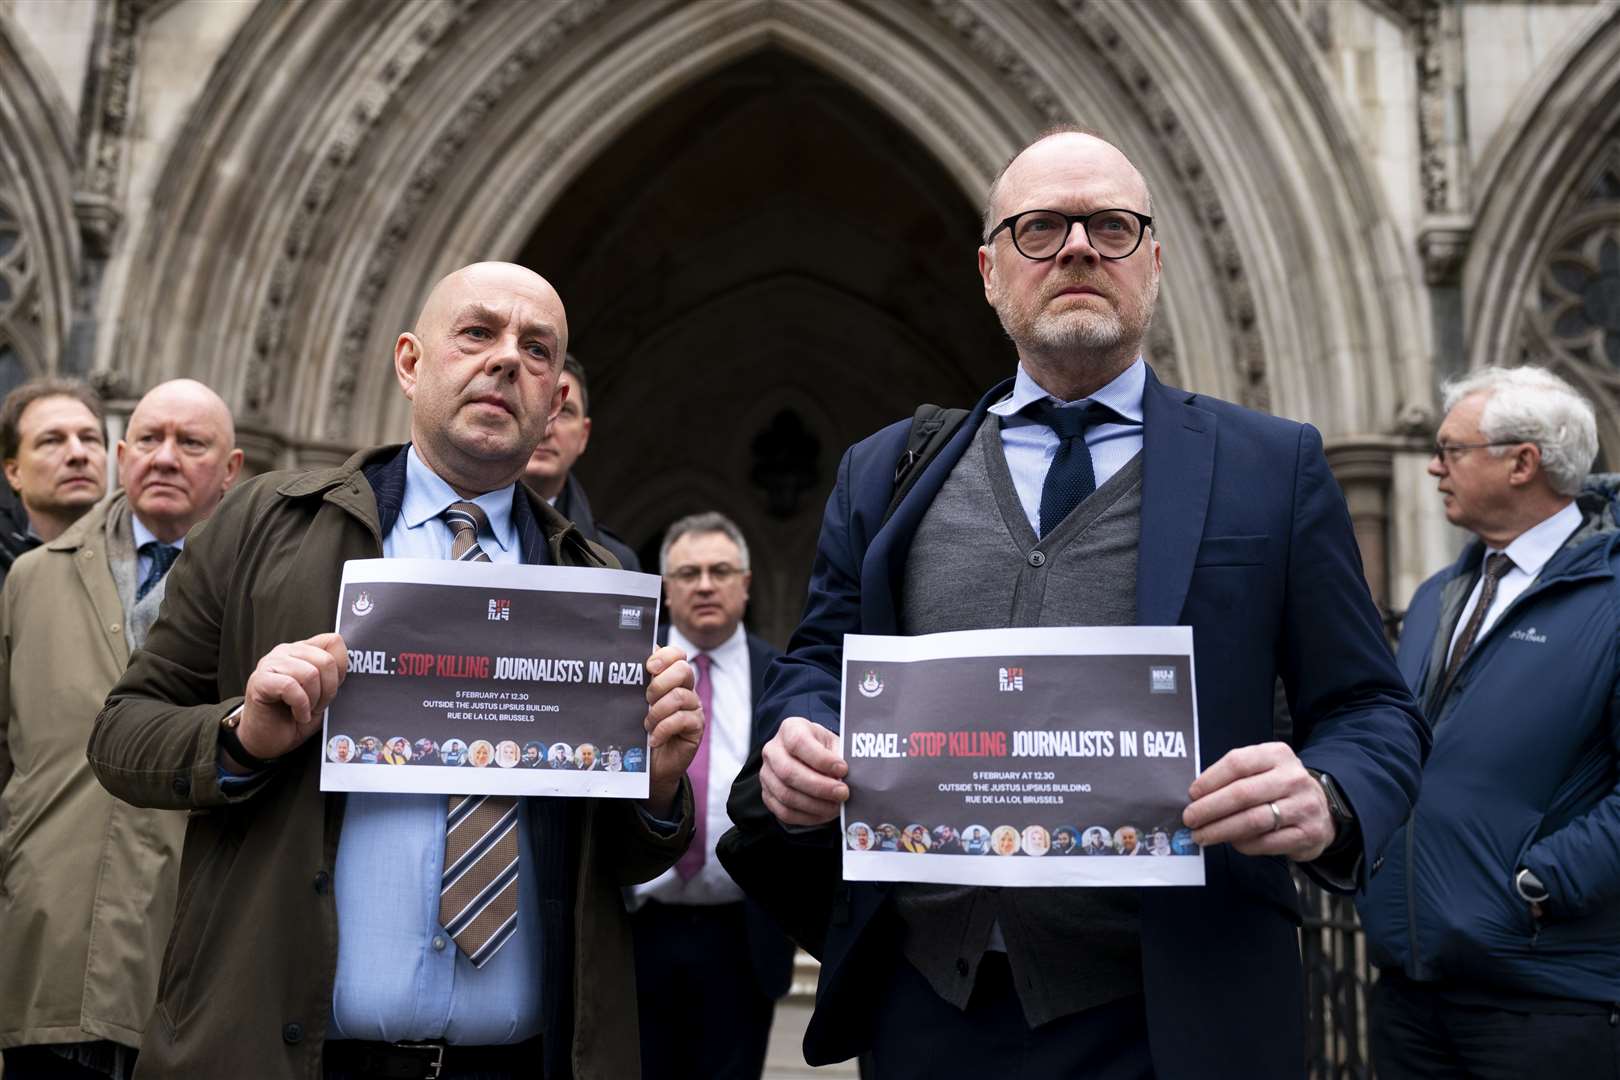 Journalists Barry McCaffrey and Trevor Birney outside the Royal Courts of Justice ahead of the specialist tribunal hearing (Jordan Pettitt/PA)